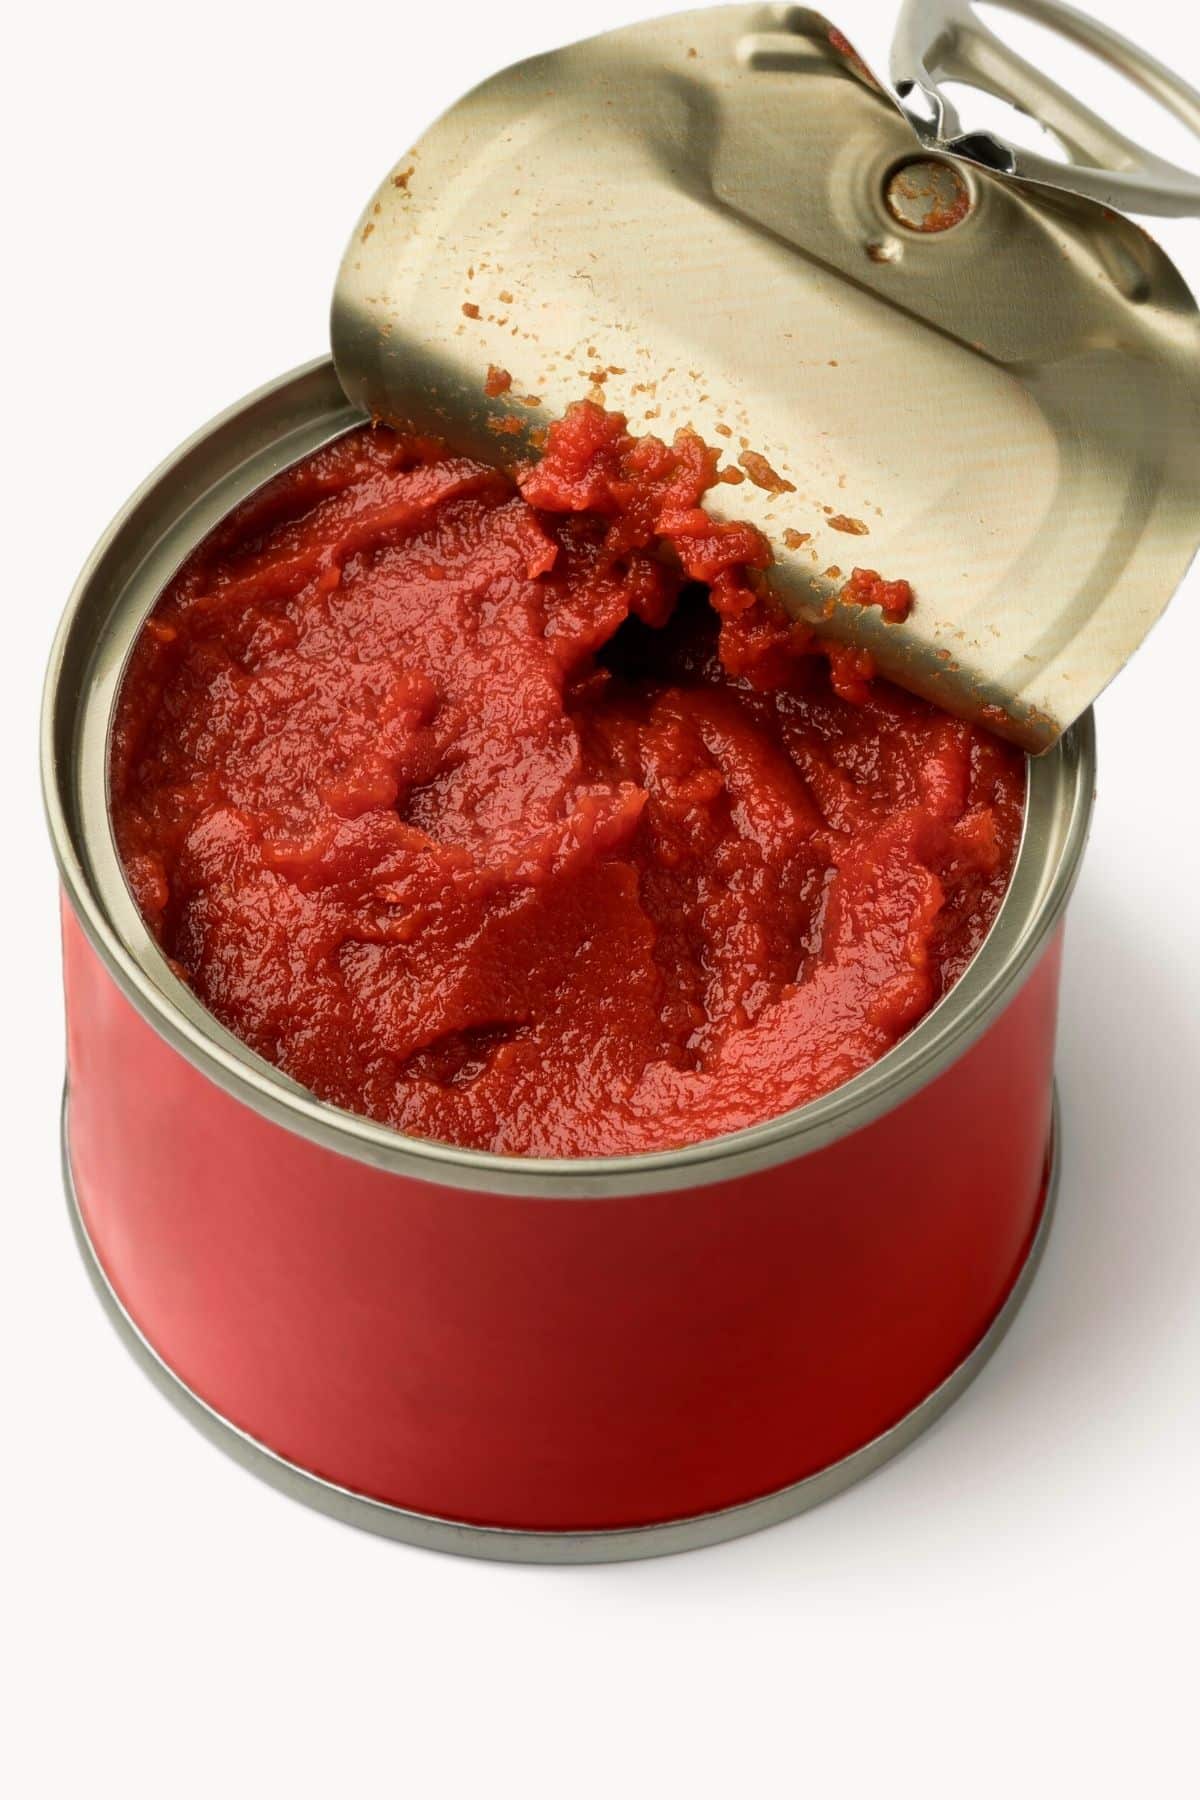 an open can of tomato paste.